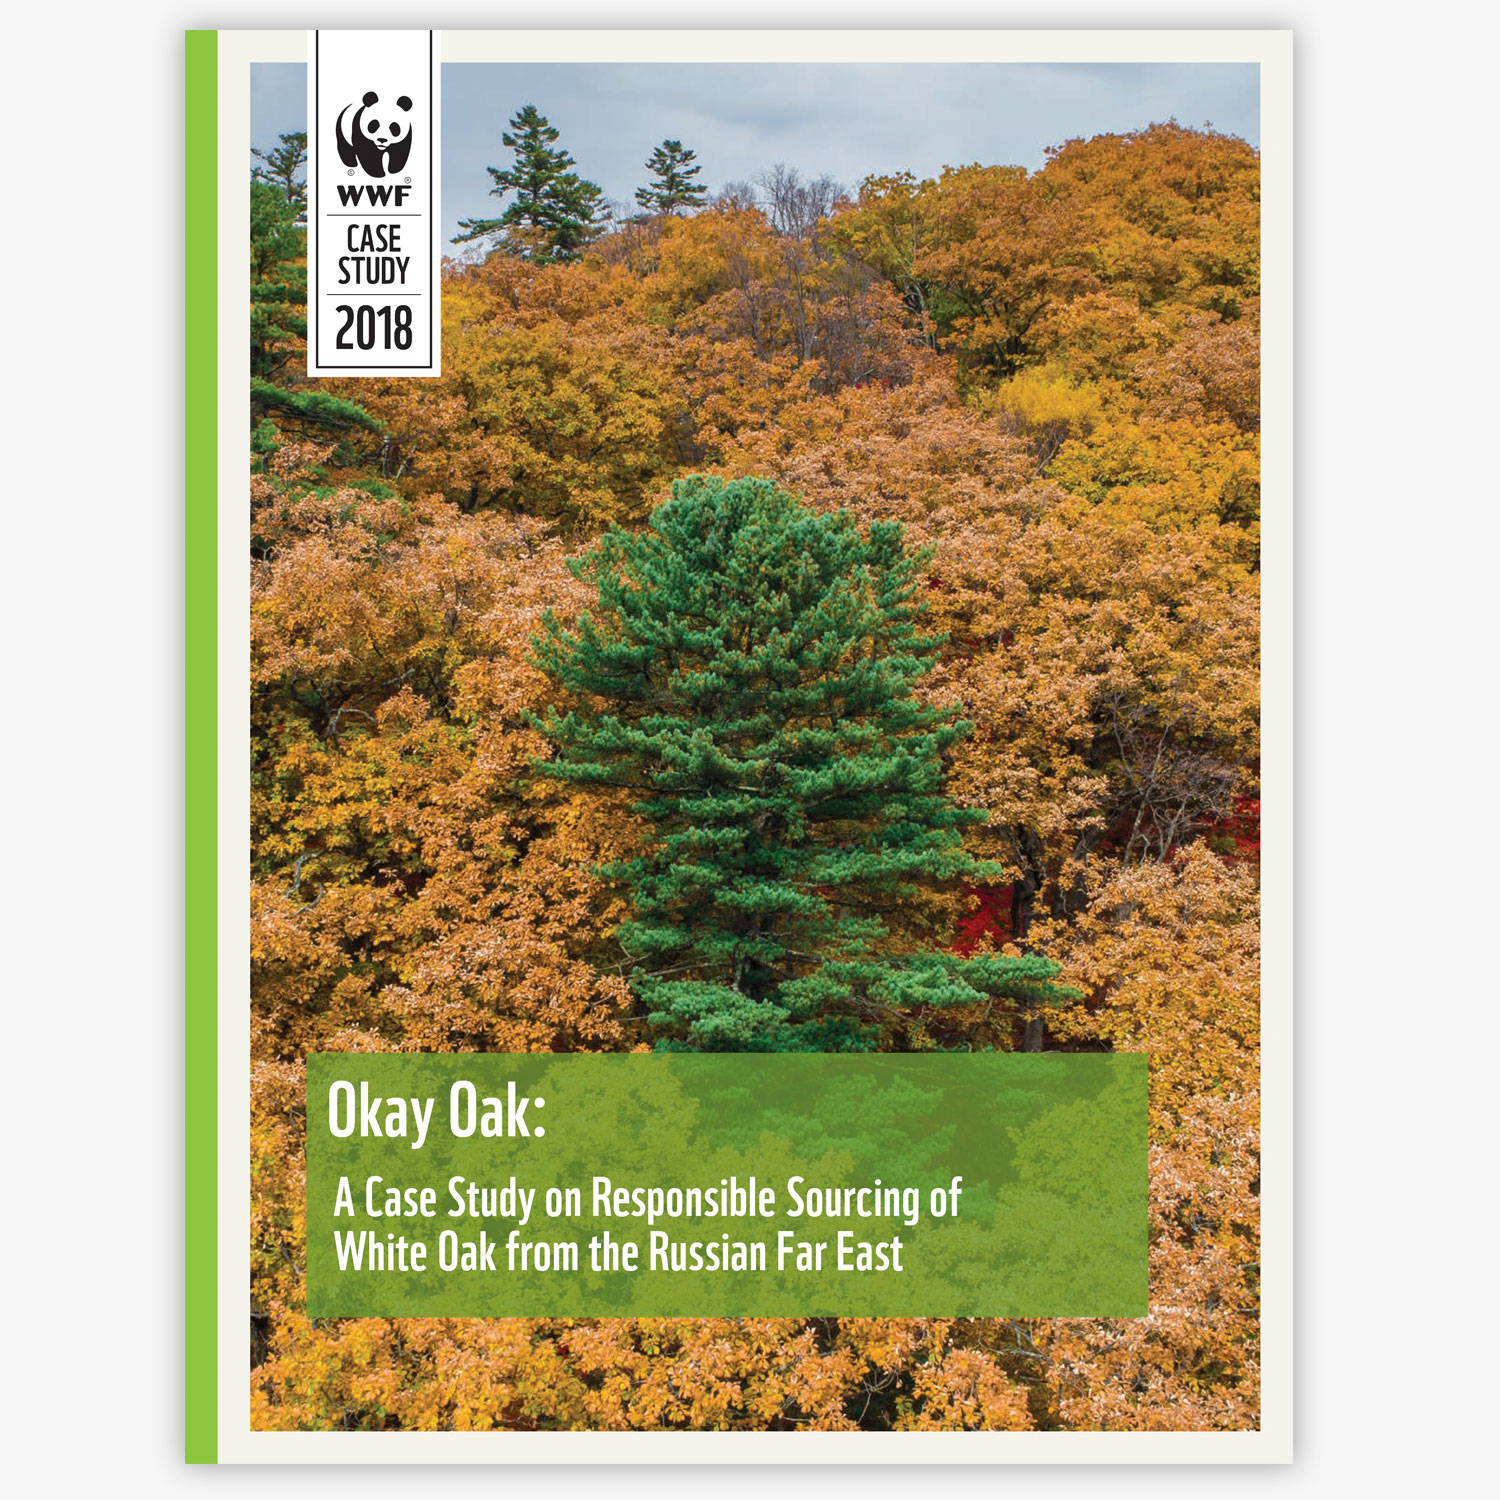  Case Study –  Okay, Oak: A Case Study on Responsible Sourcing of White Oak from the Russian Far East  